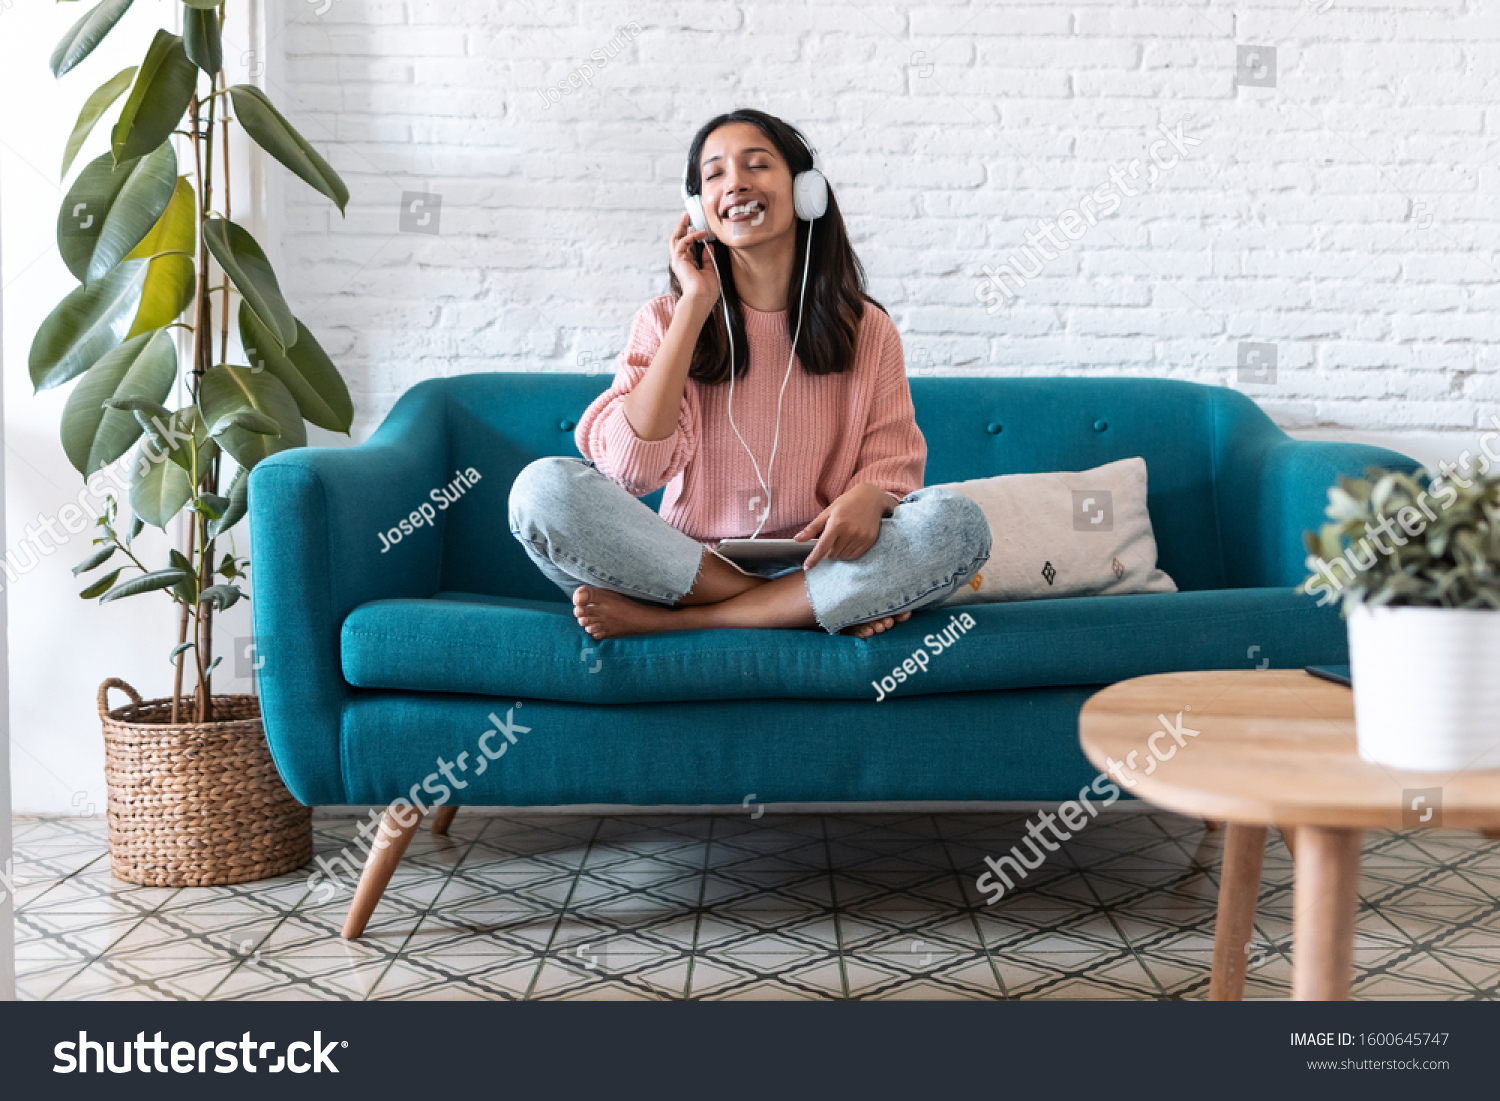 Shot of pretty young woman listening to music with digital tablet and relaxing while sitting on sofa at home. #1600645747